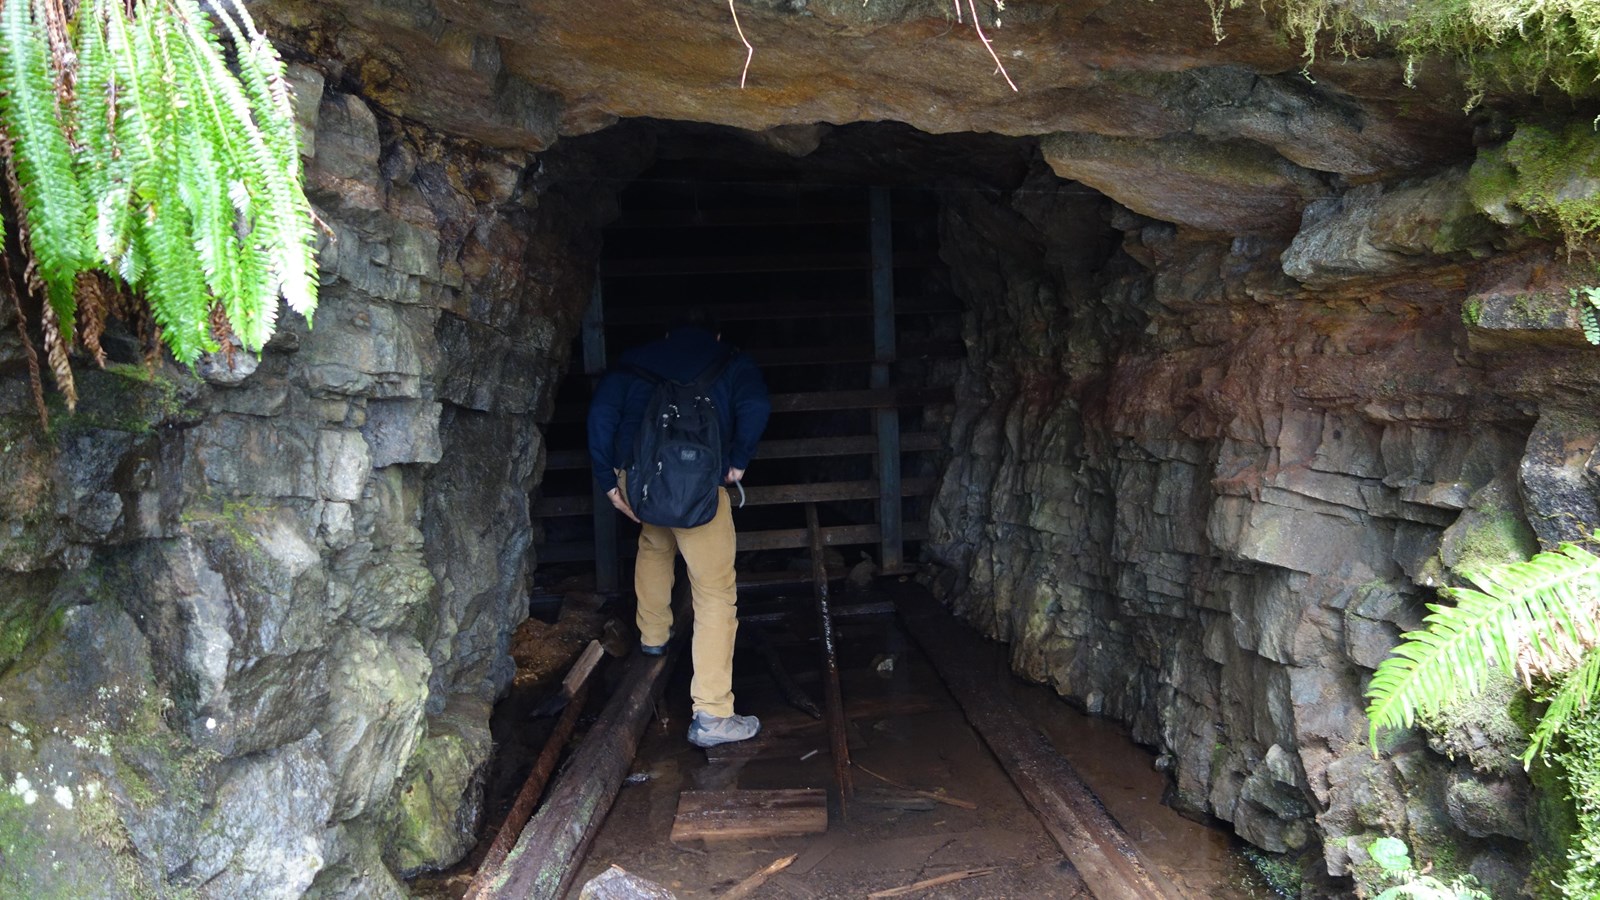 A hiker looks into the entrance of a gated mine.